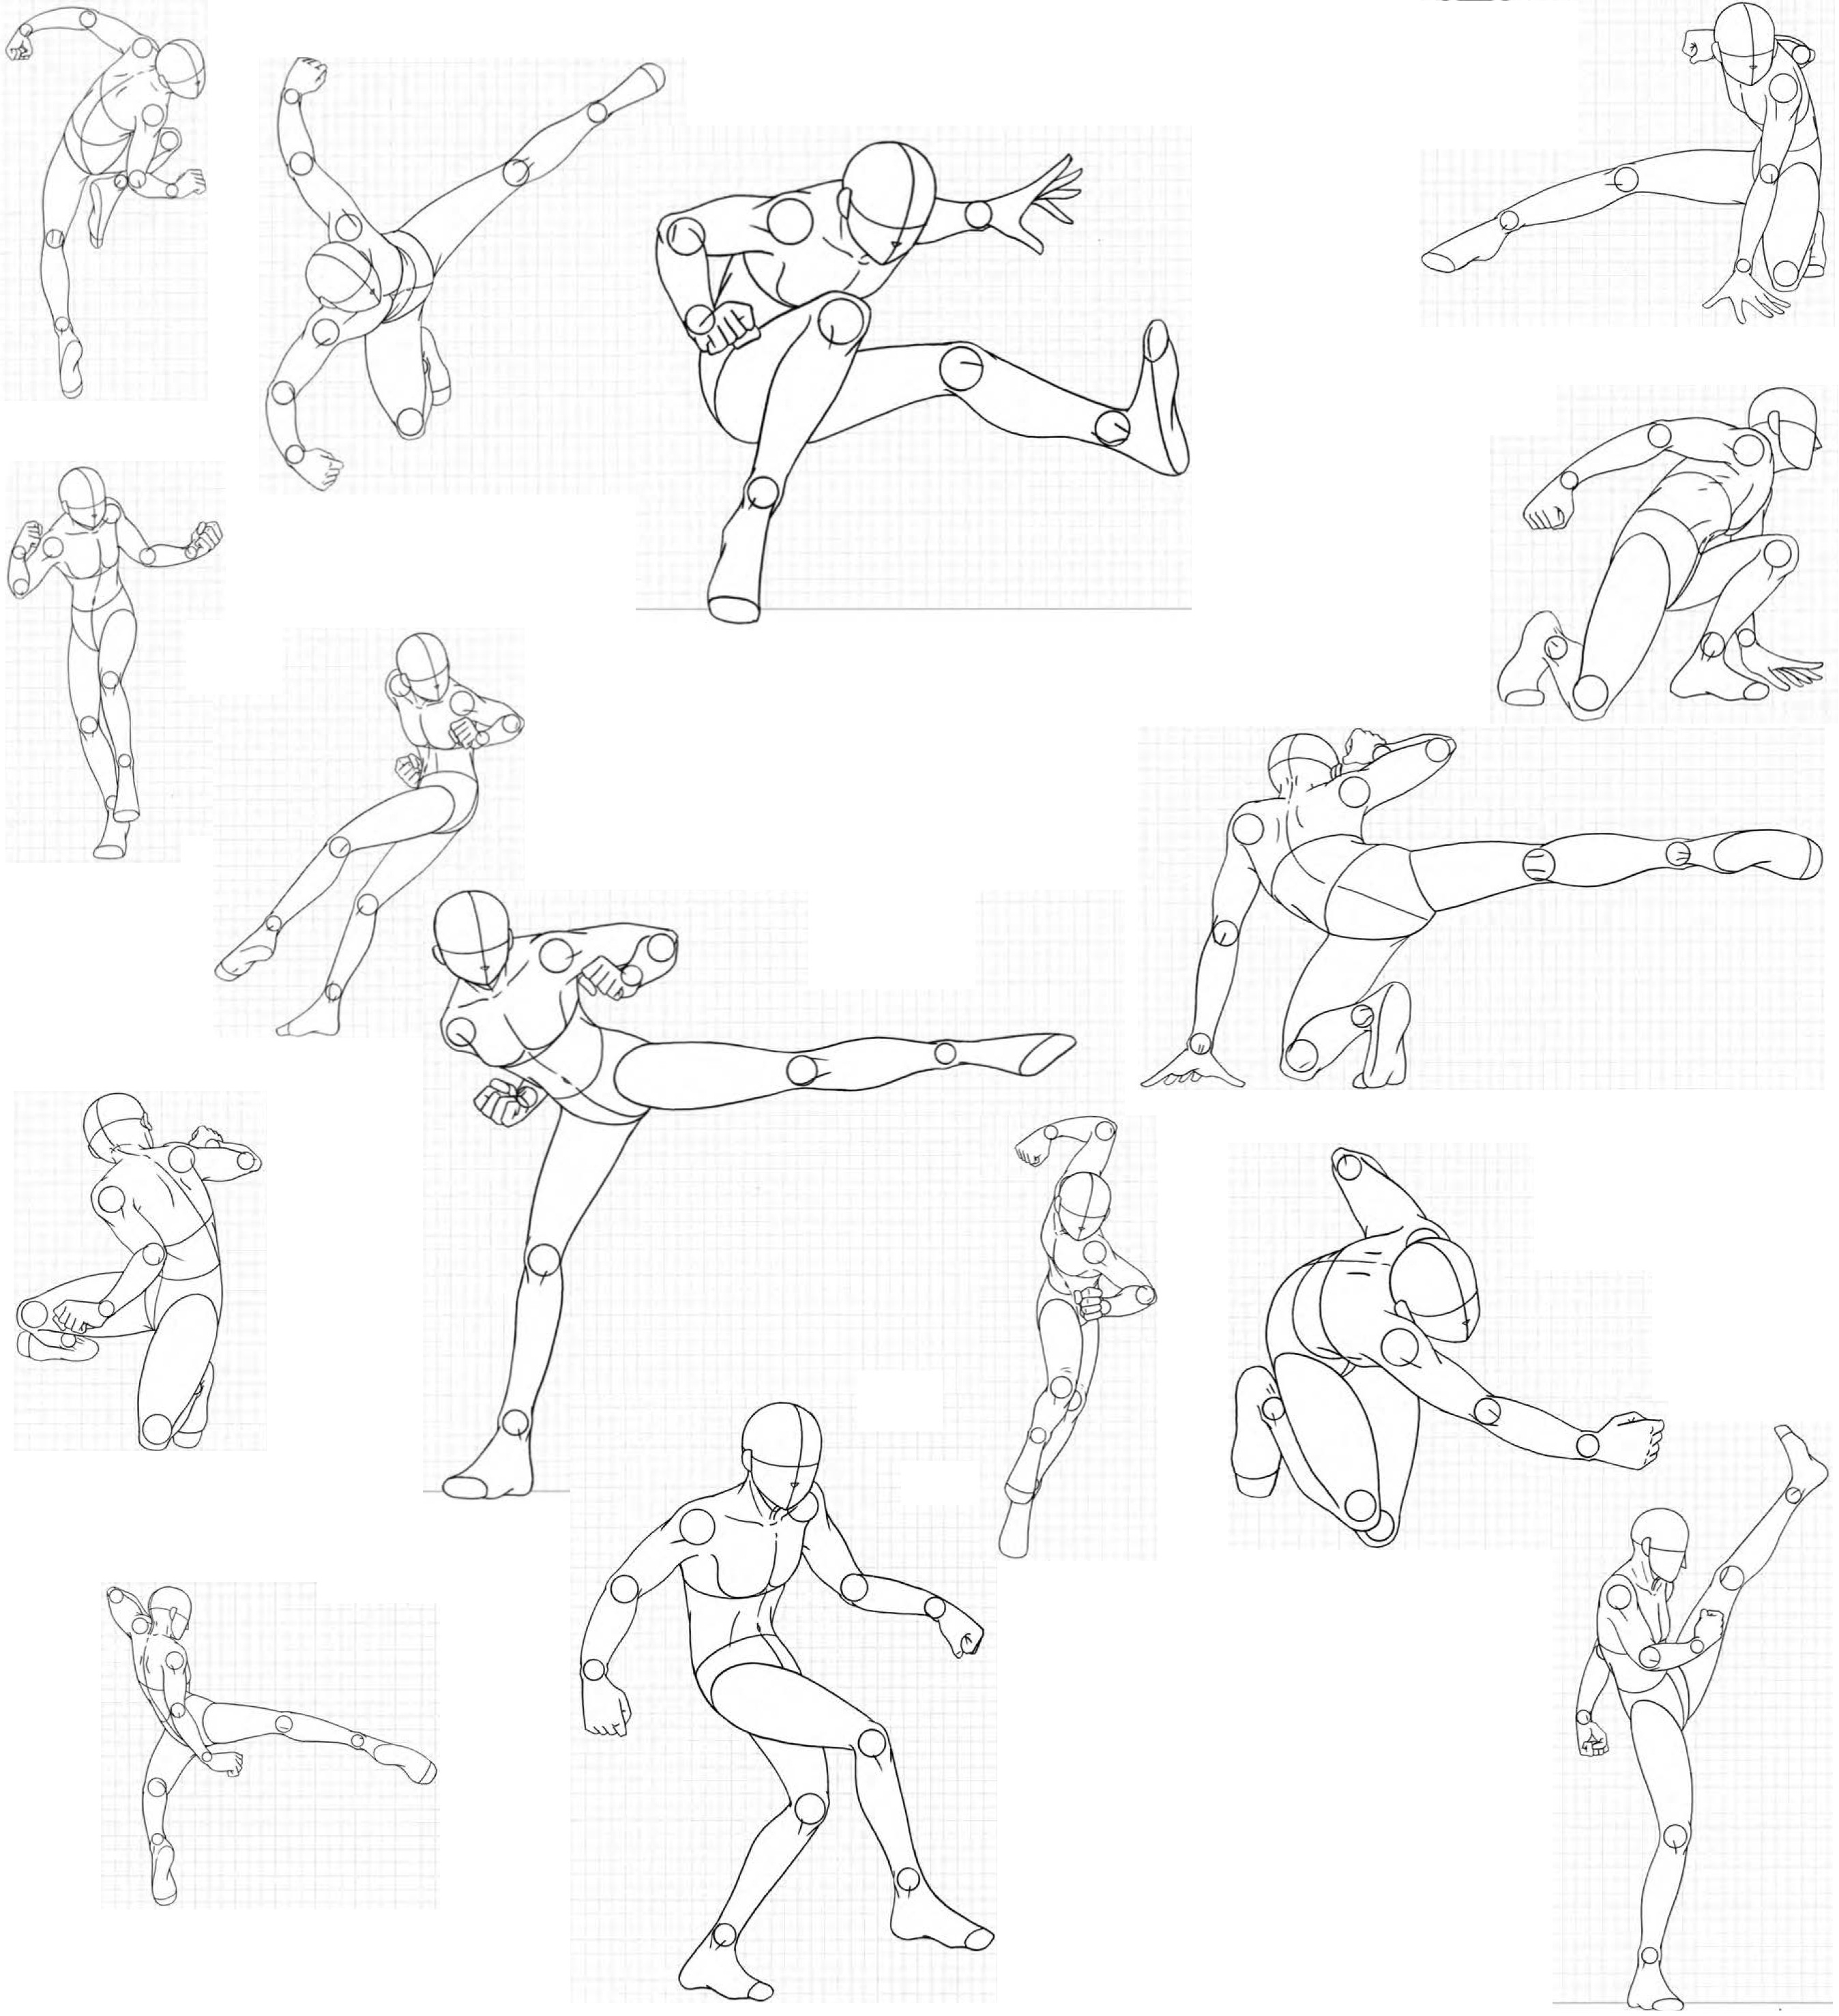 Anime Body Poses Reference ~ Body Drawing Poses Reference Human Sketch ...